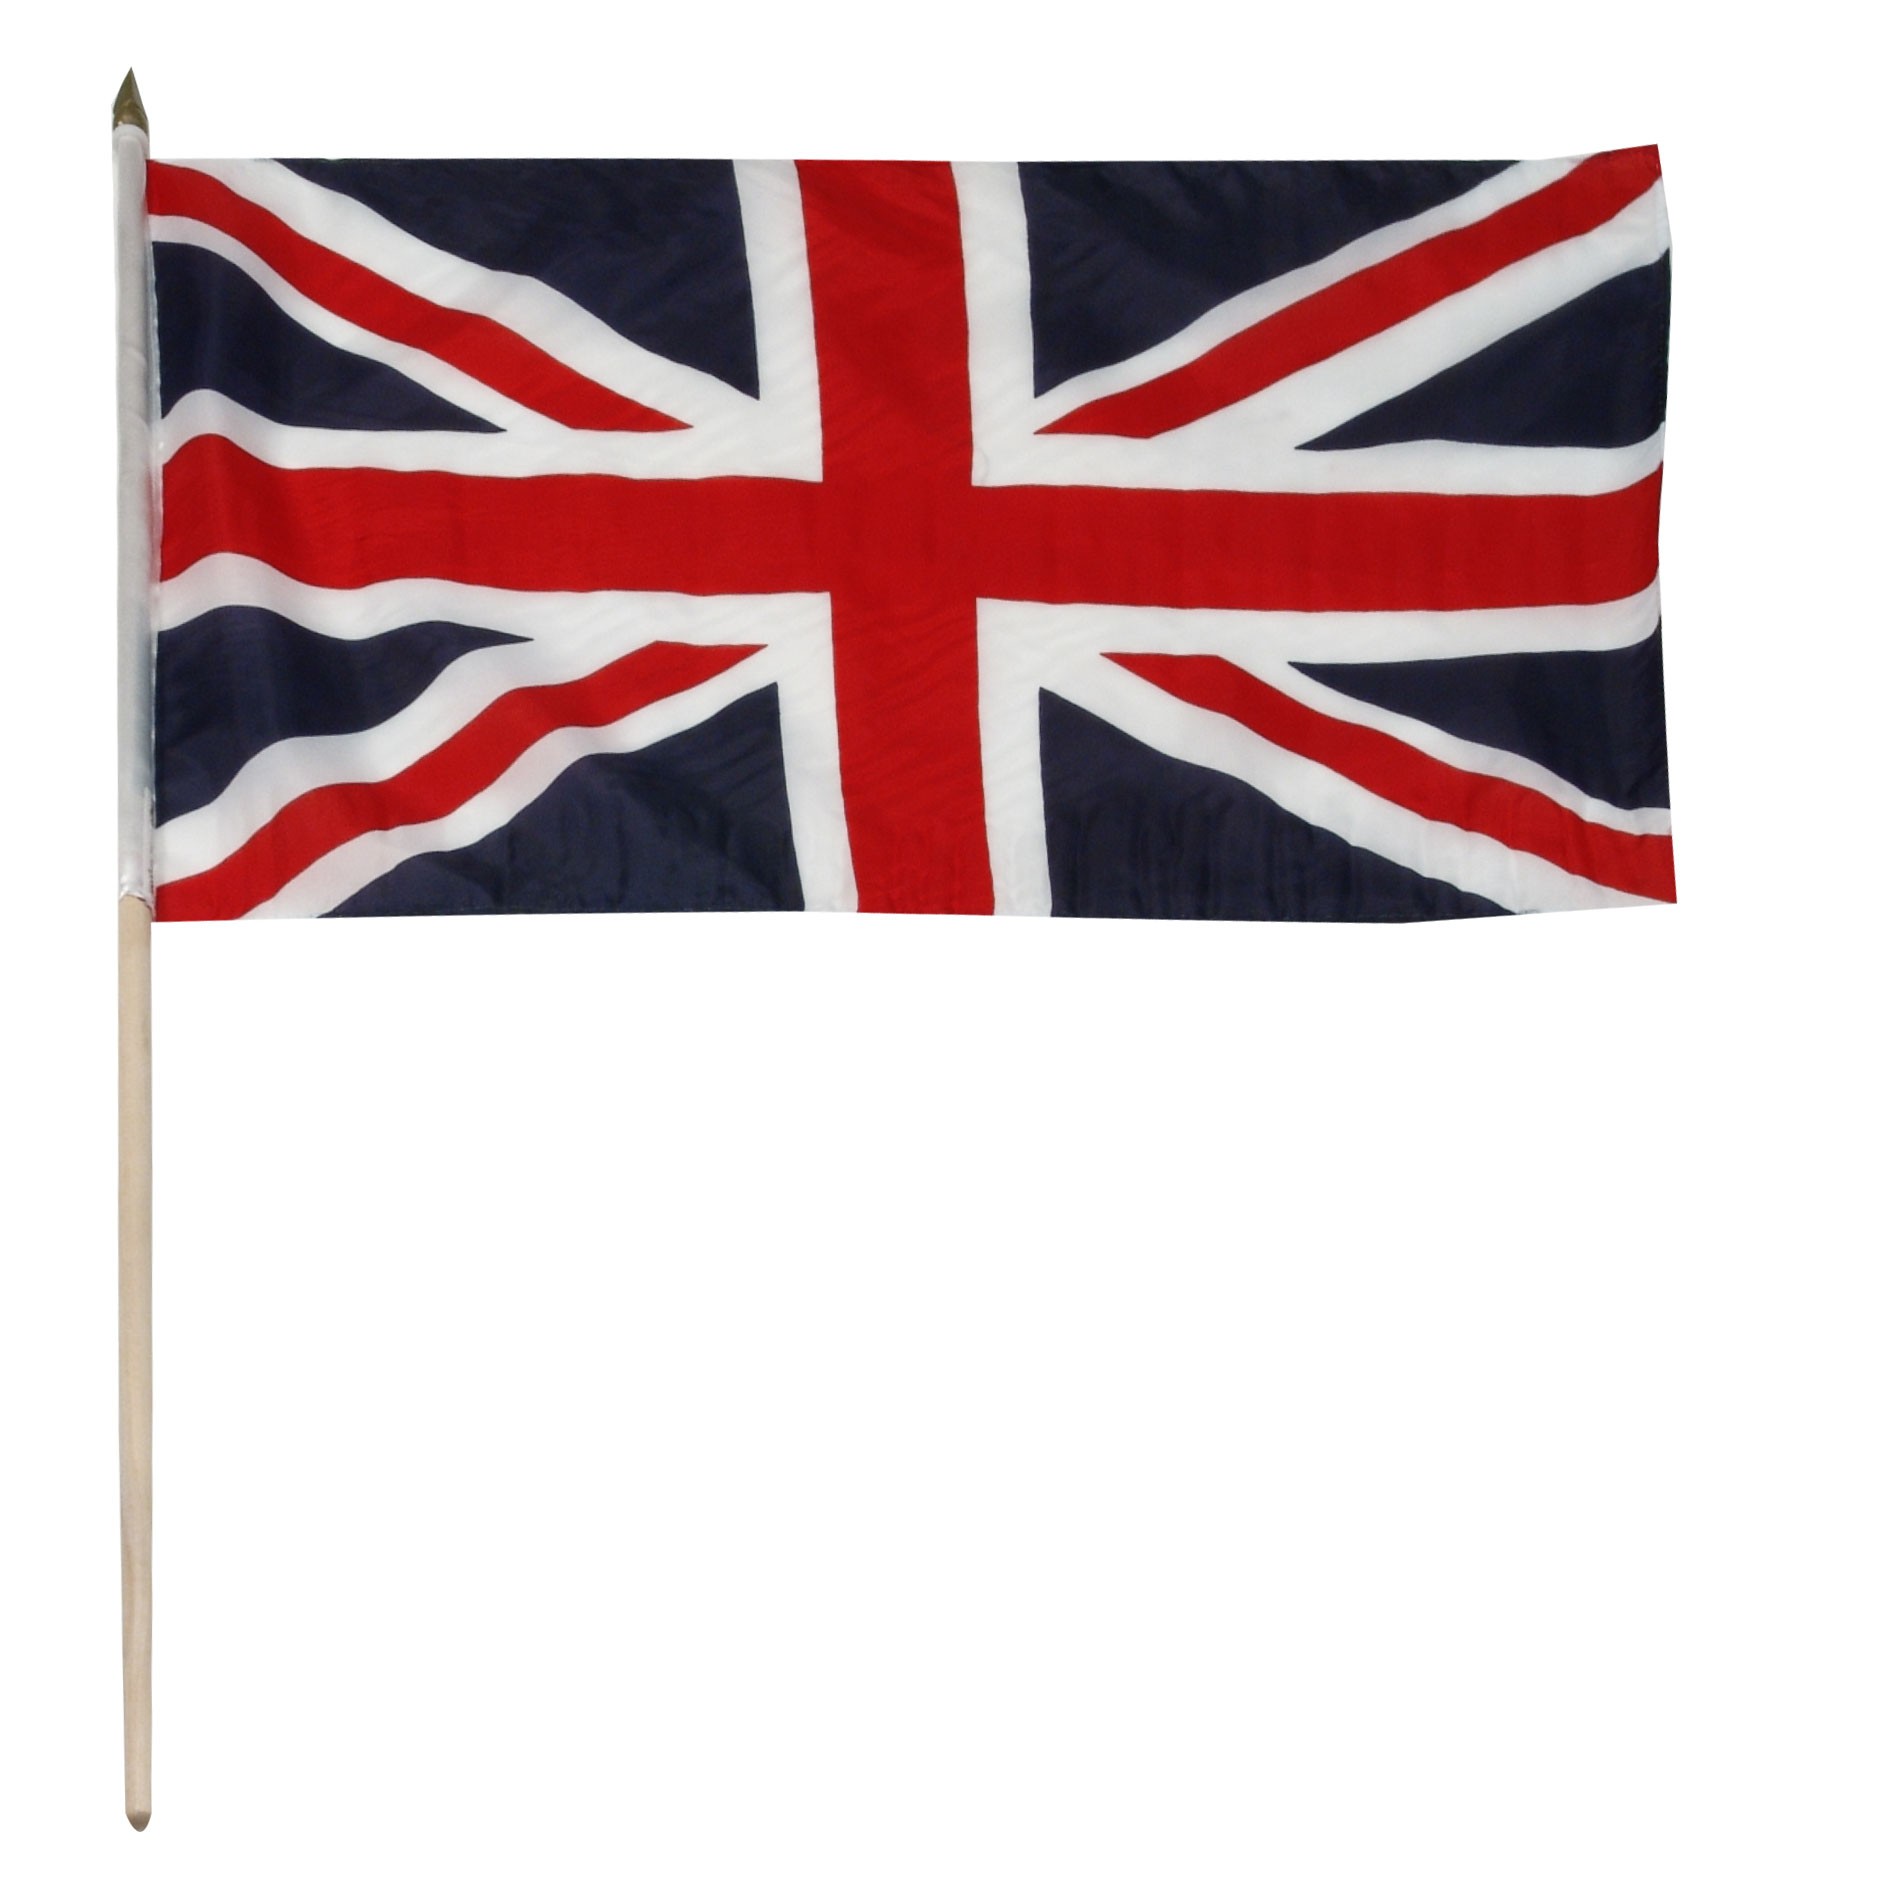 Free The British Flag, Download Free Clip Art, Free Clip Art on.